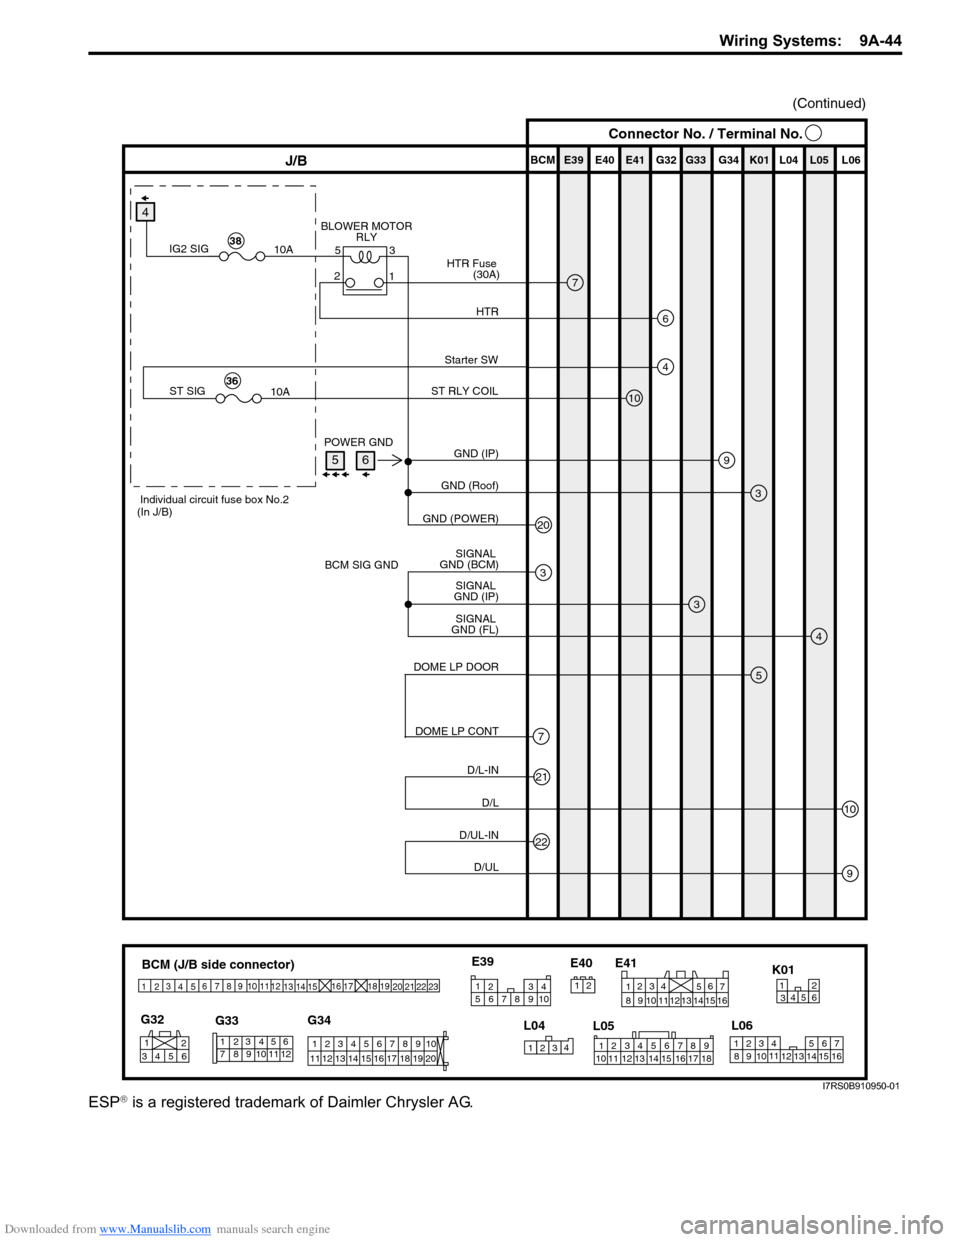 SUZUKI SWIFT 2006 2.G Service Workshop Manual Downloaded from www.Manualslib.com manuals search engine Wiring Systems:  9A-44
ESP® is a registered trademark of Daimler Chrysler AG.
BCM (J/B side connector)
34
1
2 5
15
14
12
13
10
11
9
8
6
7
17
1